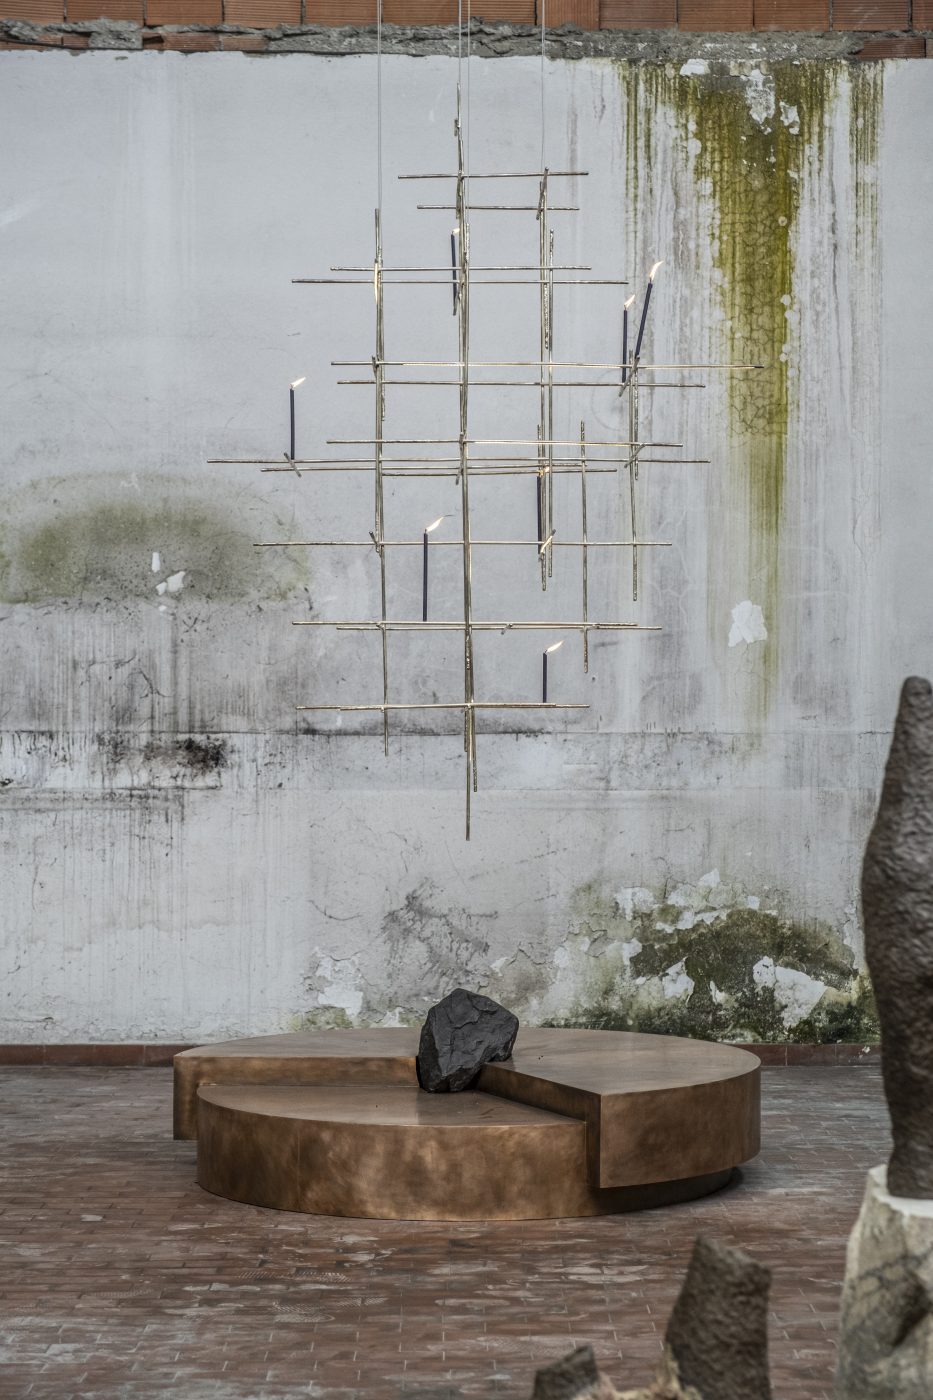 Morgen Studio’s KAIROS CHANDELIER and PIERRE DE VALCK’s TIME TABLE, offered by Galerie Philia